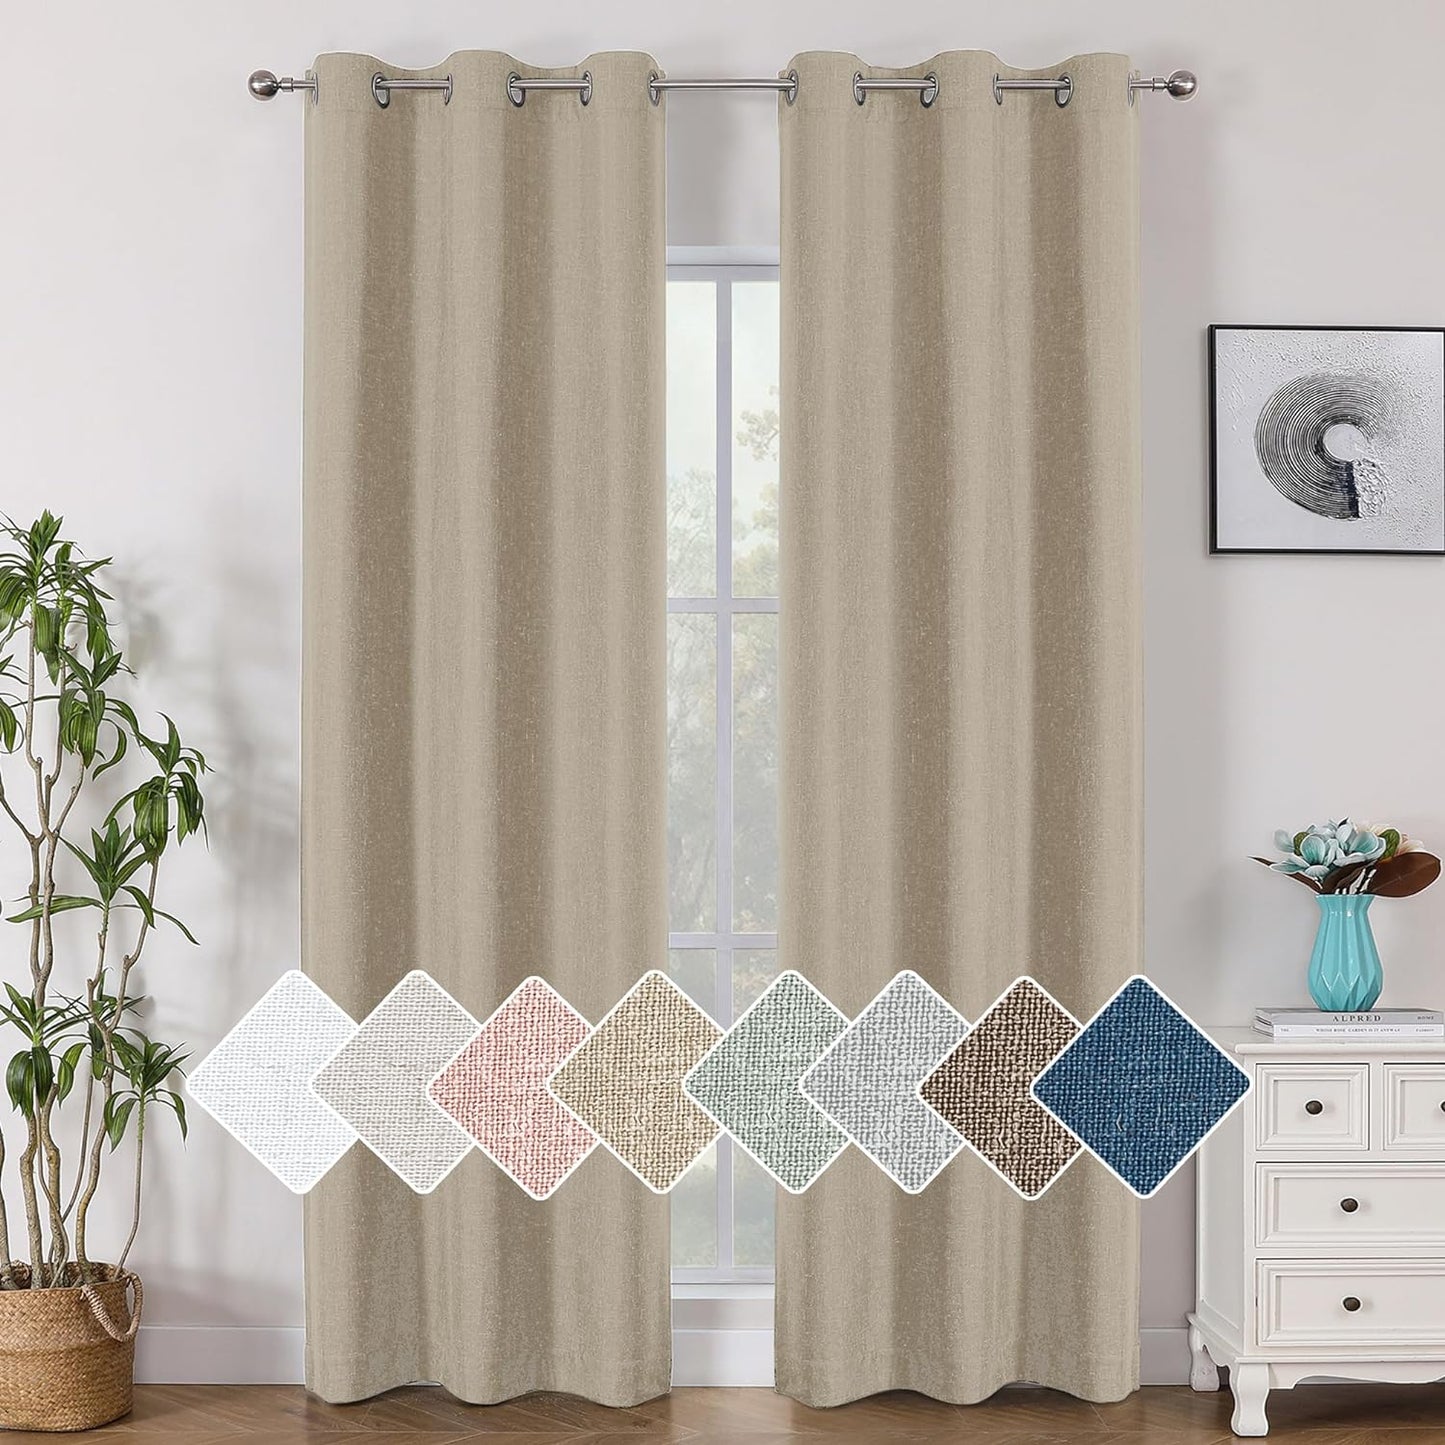 Jenny Ivory Beige Textured Linen 100% Blackout Curtains 63 Inch Length 2 Panels, Energy Saving Window Treatment Heavy Curtain Drapes for Bedroom/Living Room, Burlap Fabric Curtains, 38W  Simplebrand Linen 38"W X 96"L 